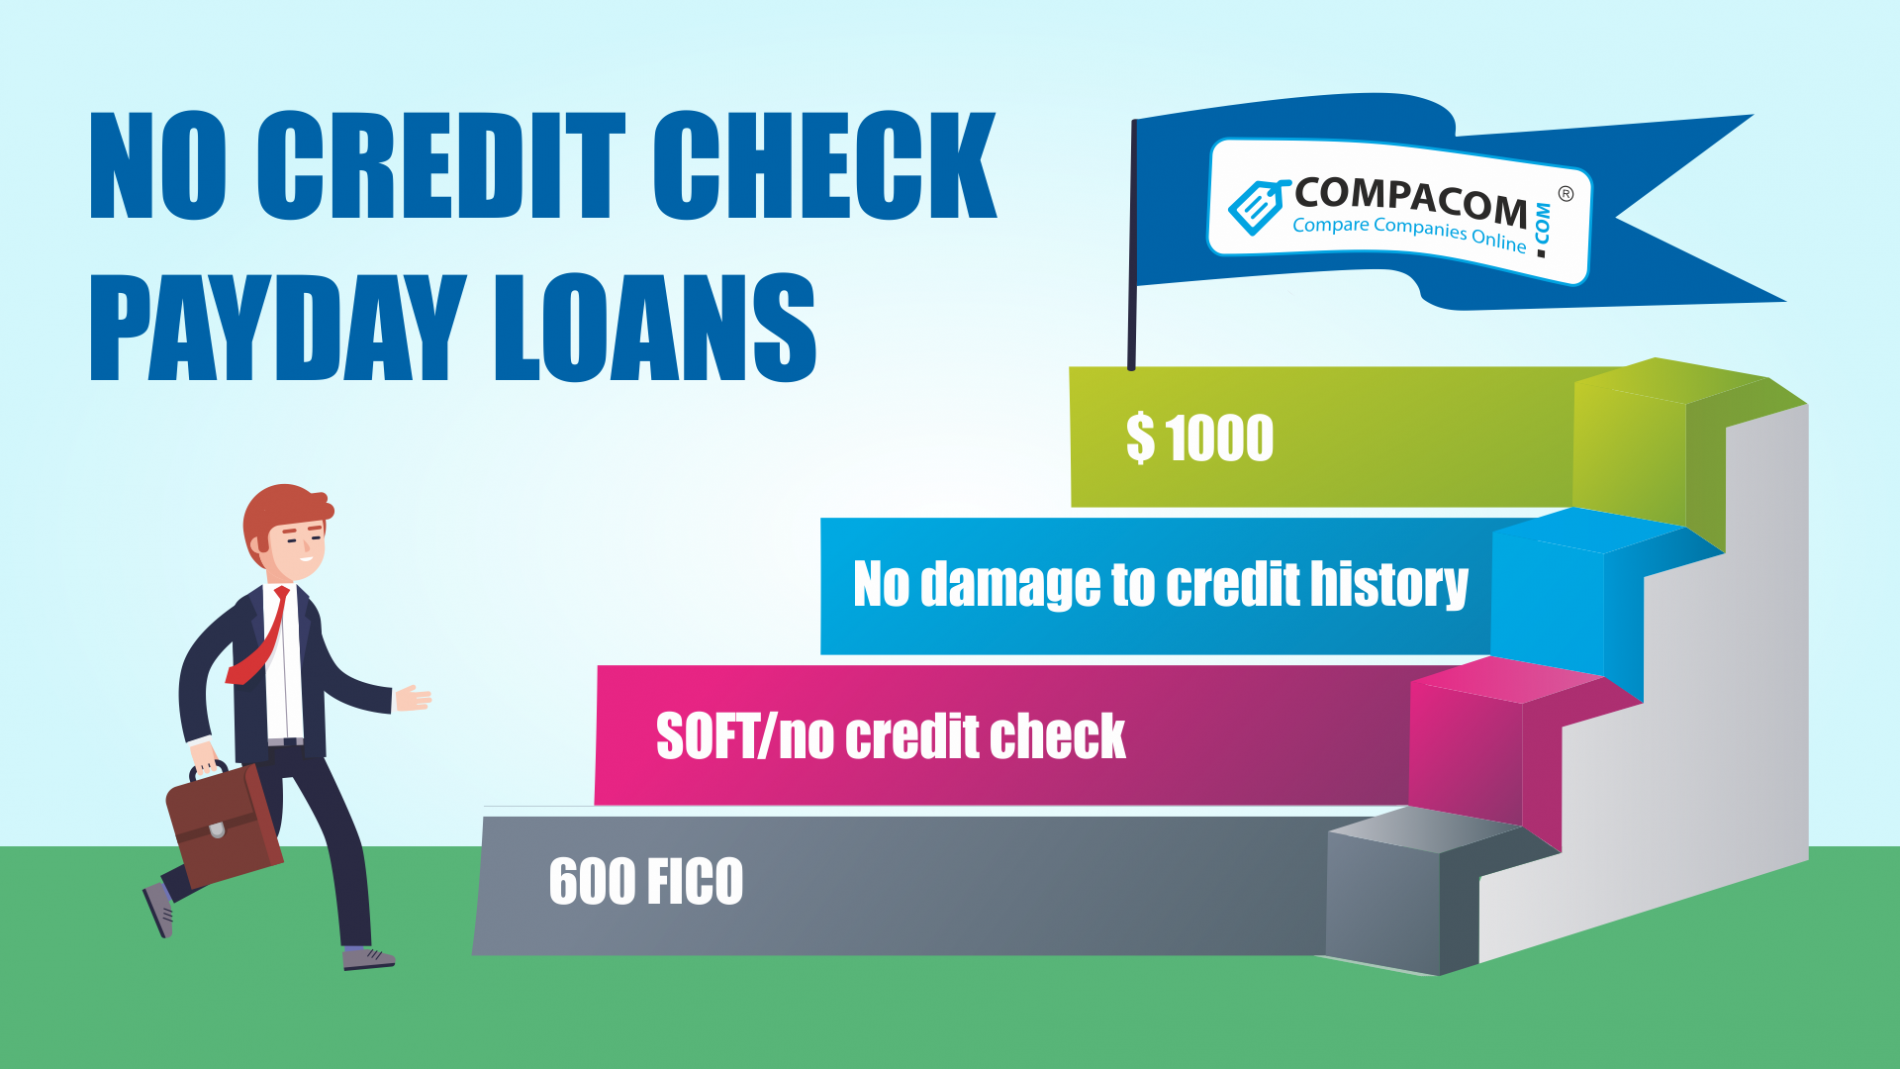 No credit check loan applications infographic